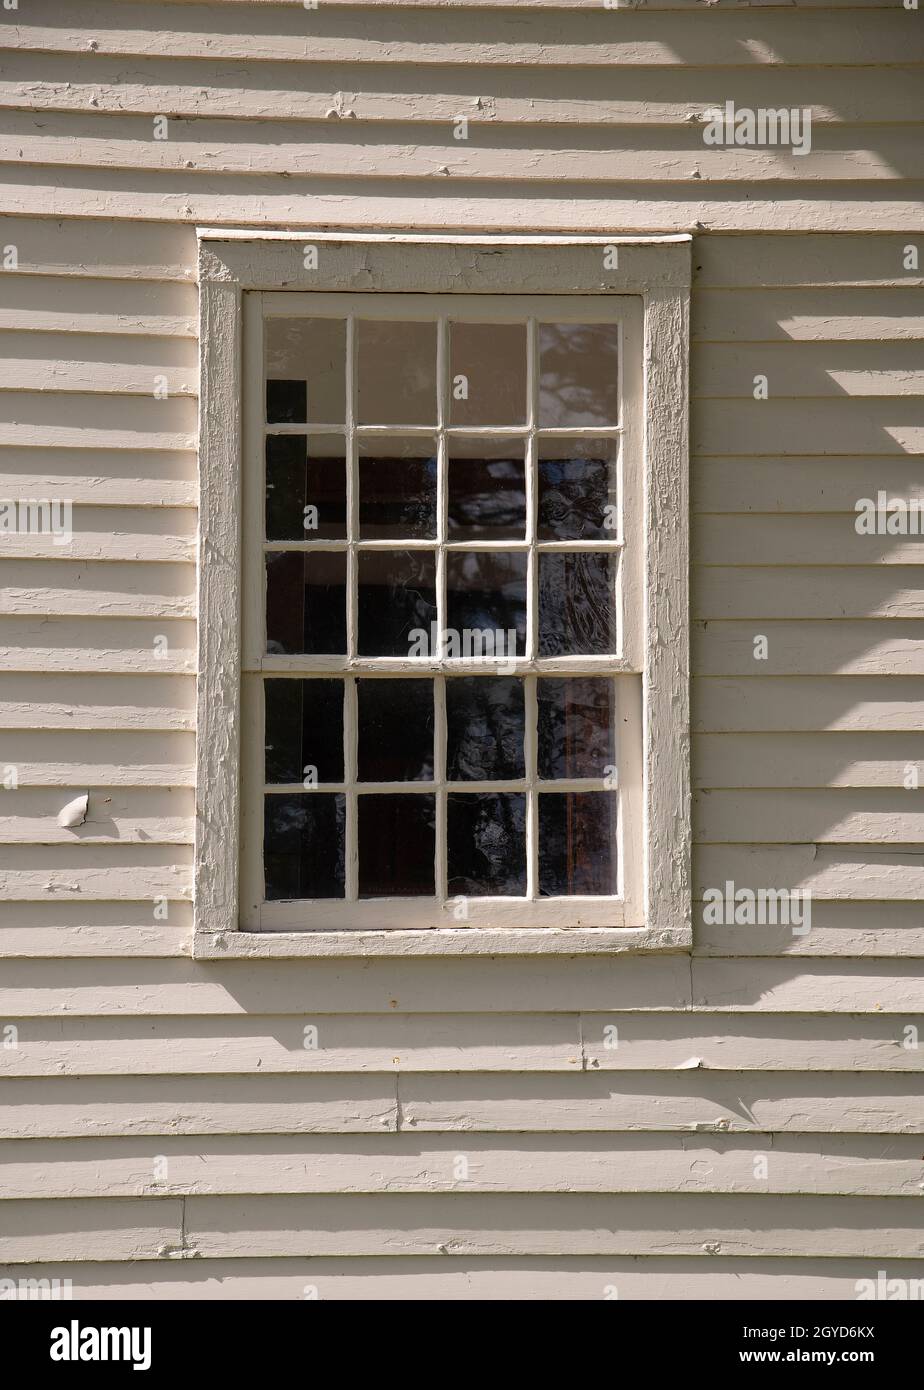 Hancock Shaker Museum, Pittsfield, Massachusetts, USA - A Shaker commune established in the 1780's. An architectural detail of a window on a village Stock Photo